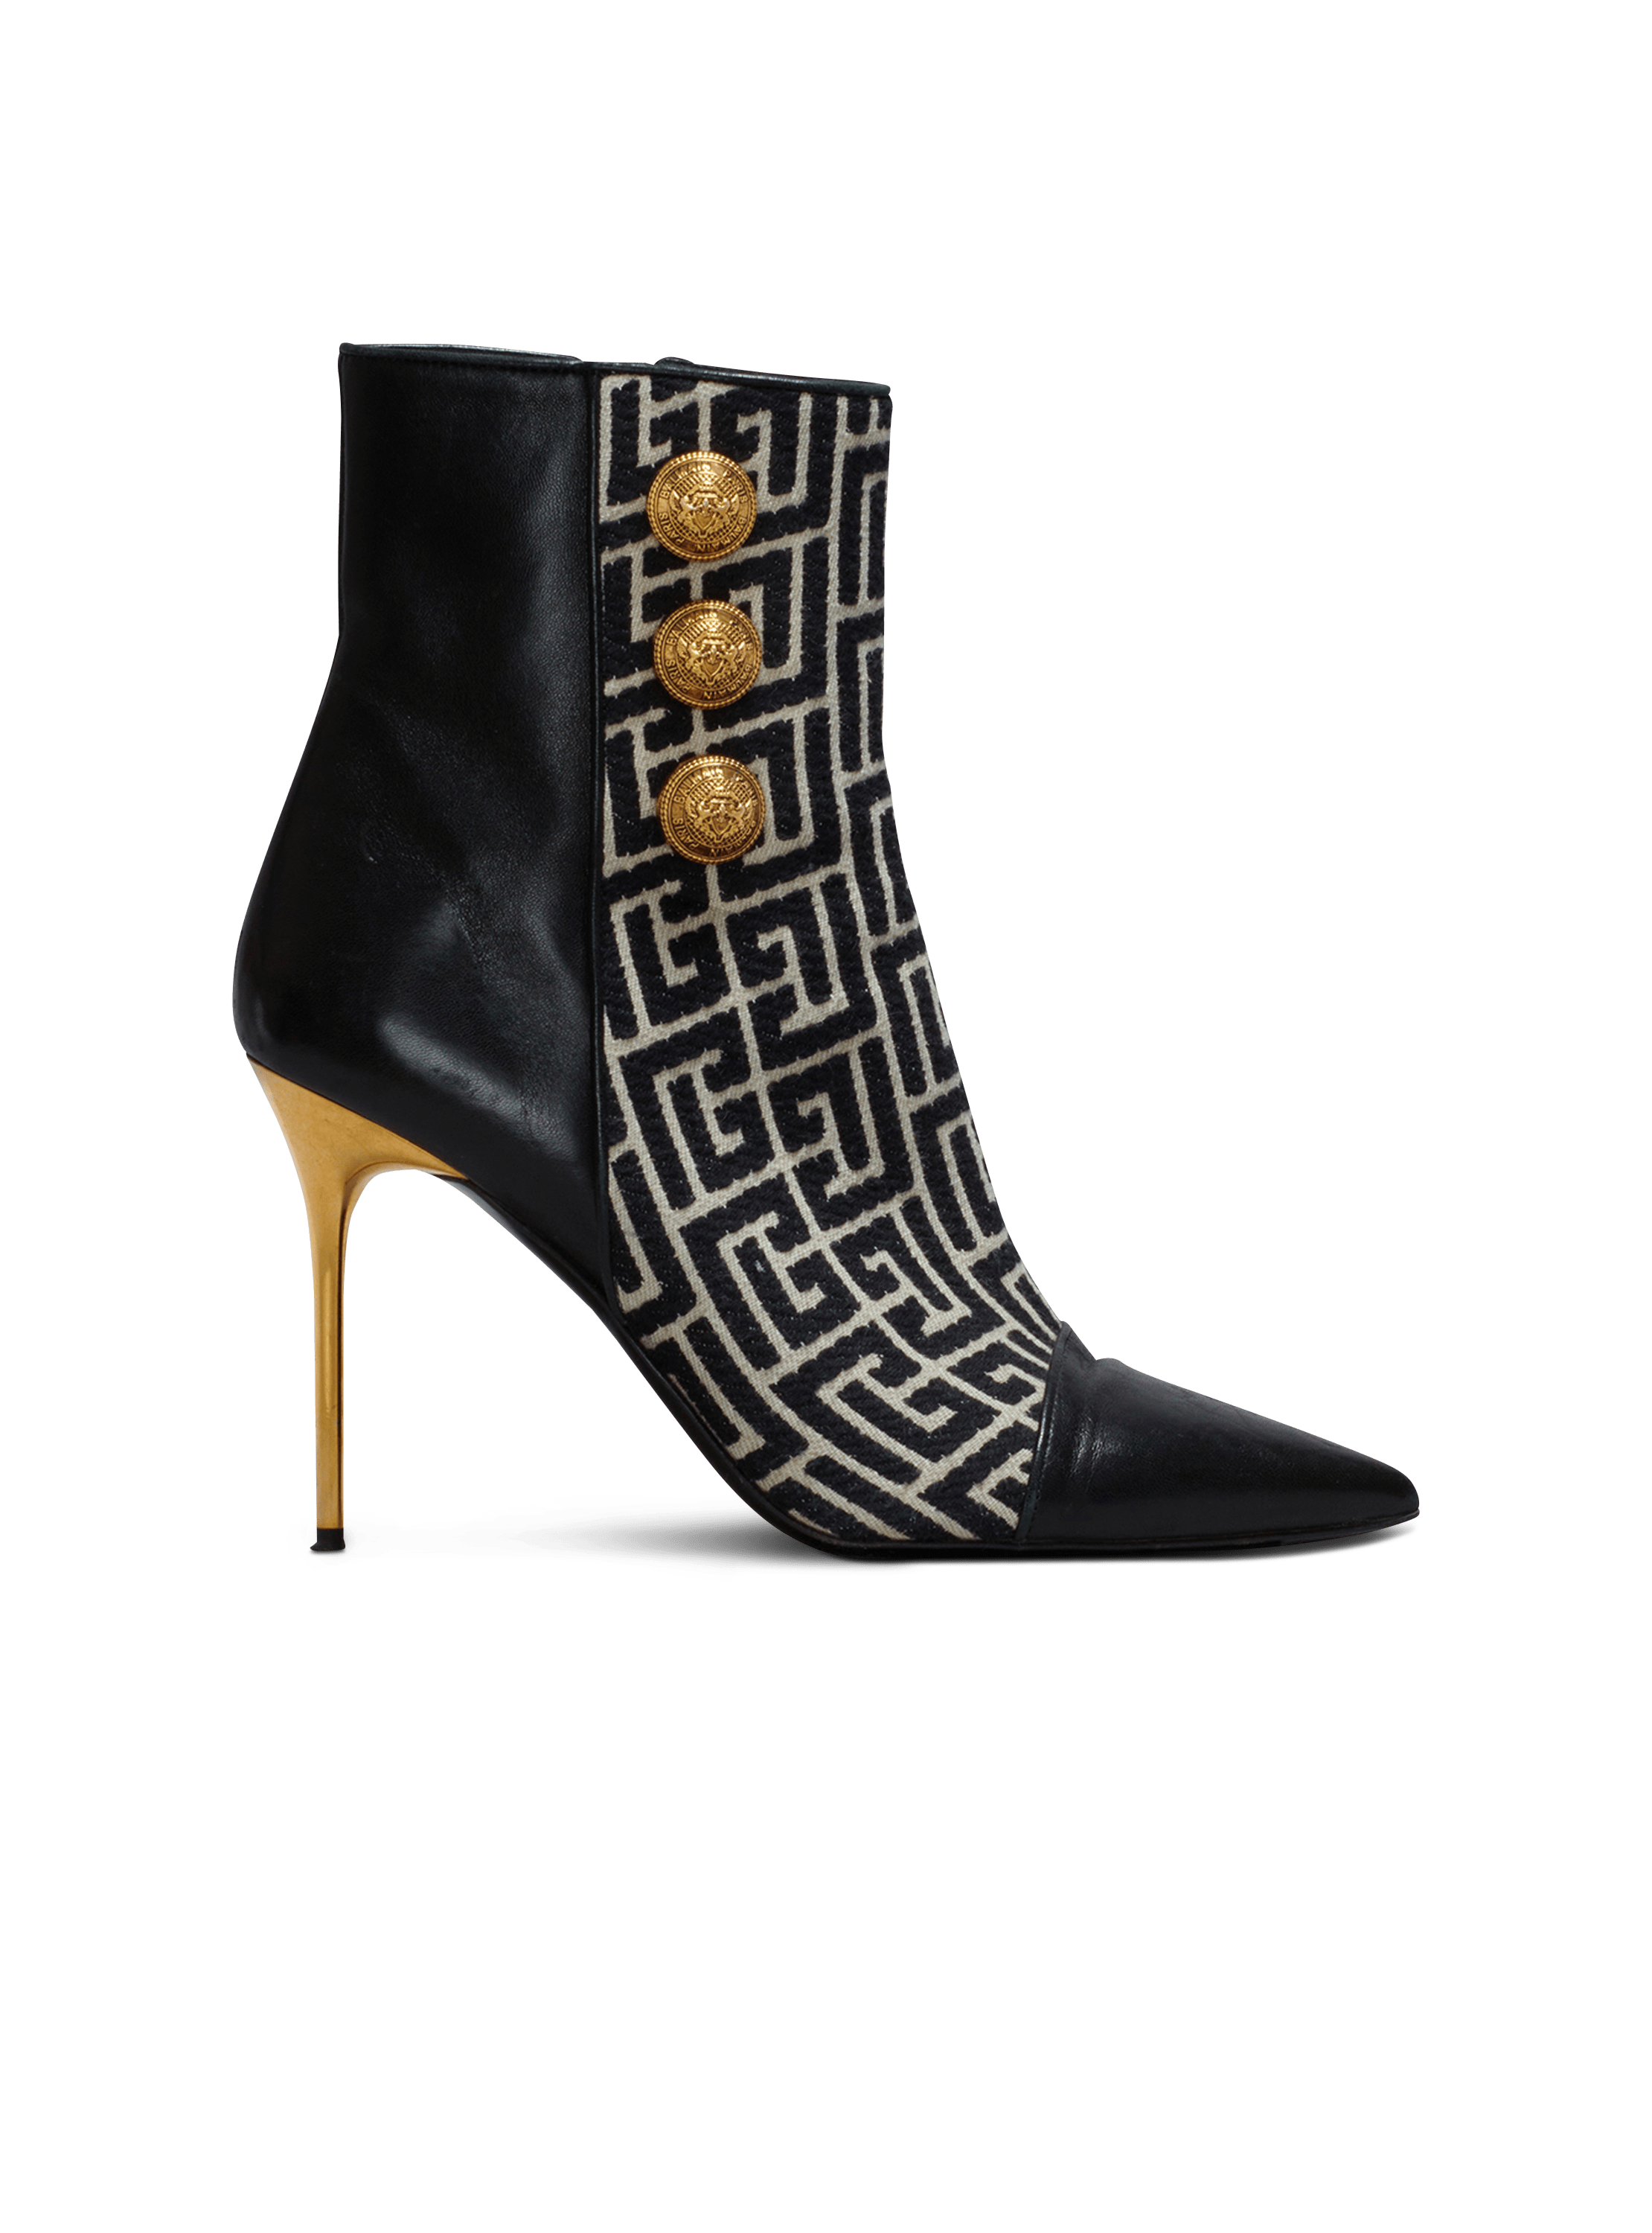 Heritage And Elegance: Pierre Balmain Ankle Boot Designs - Shoe Effect